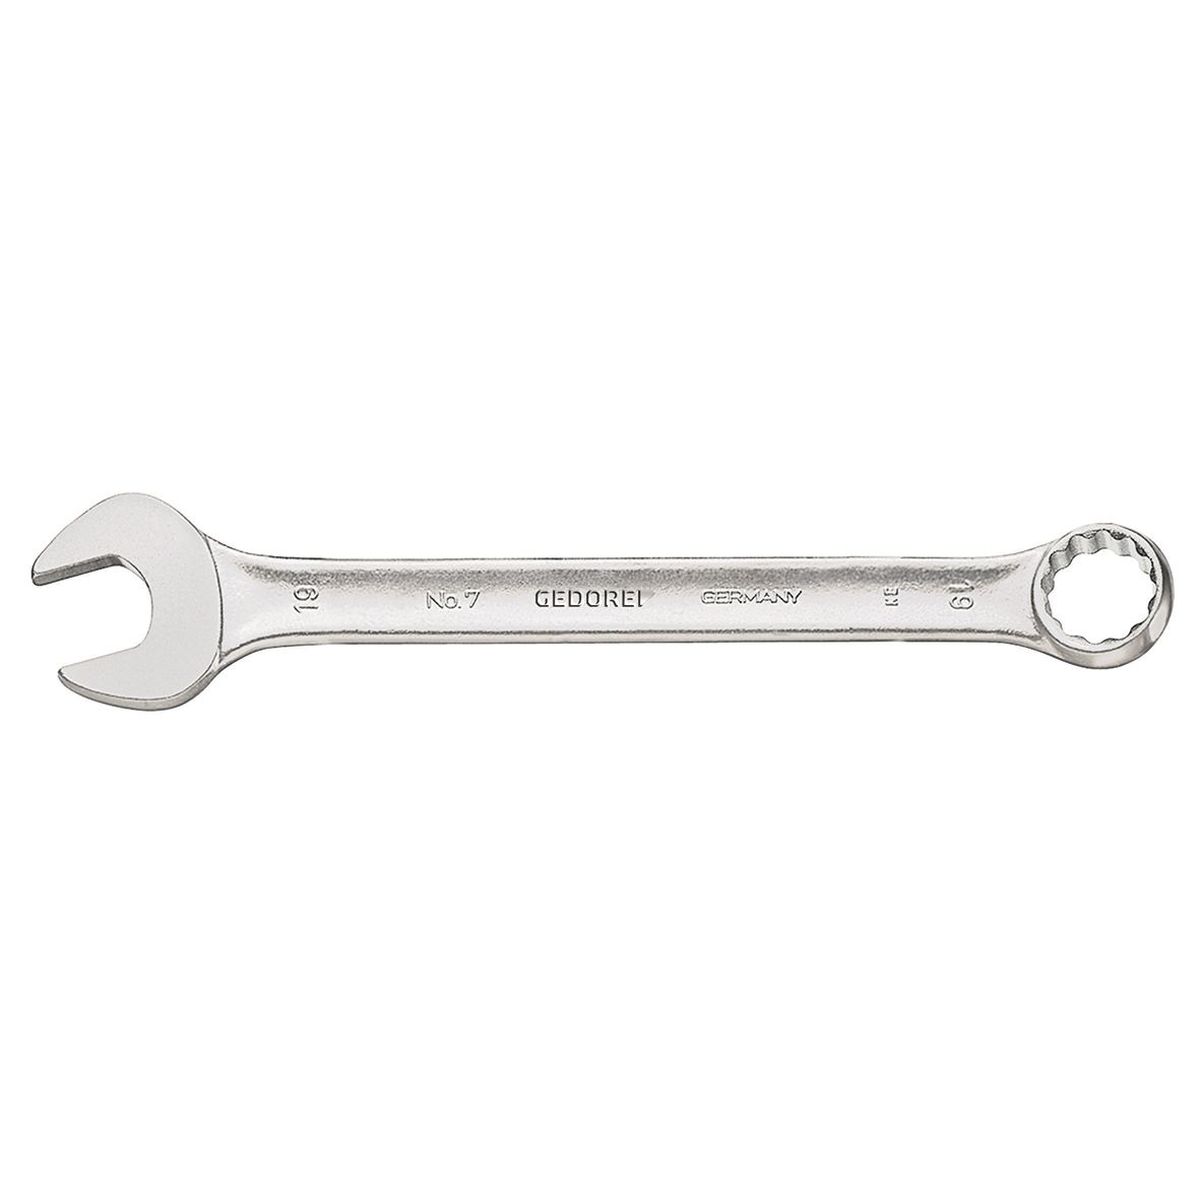 Combination spanner 18mm No.7 18 Gedore